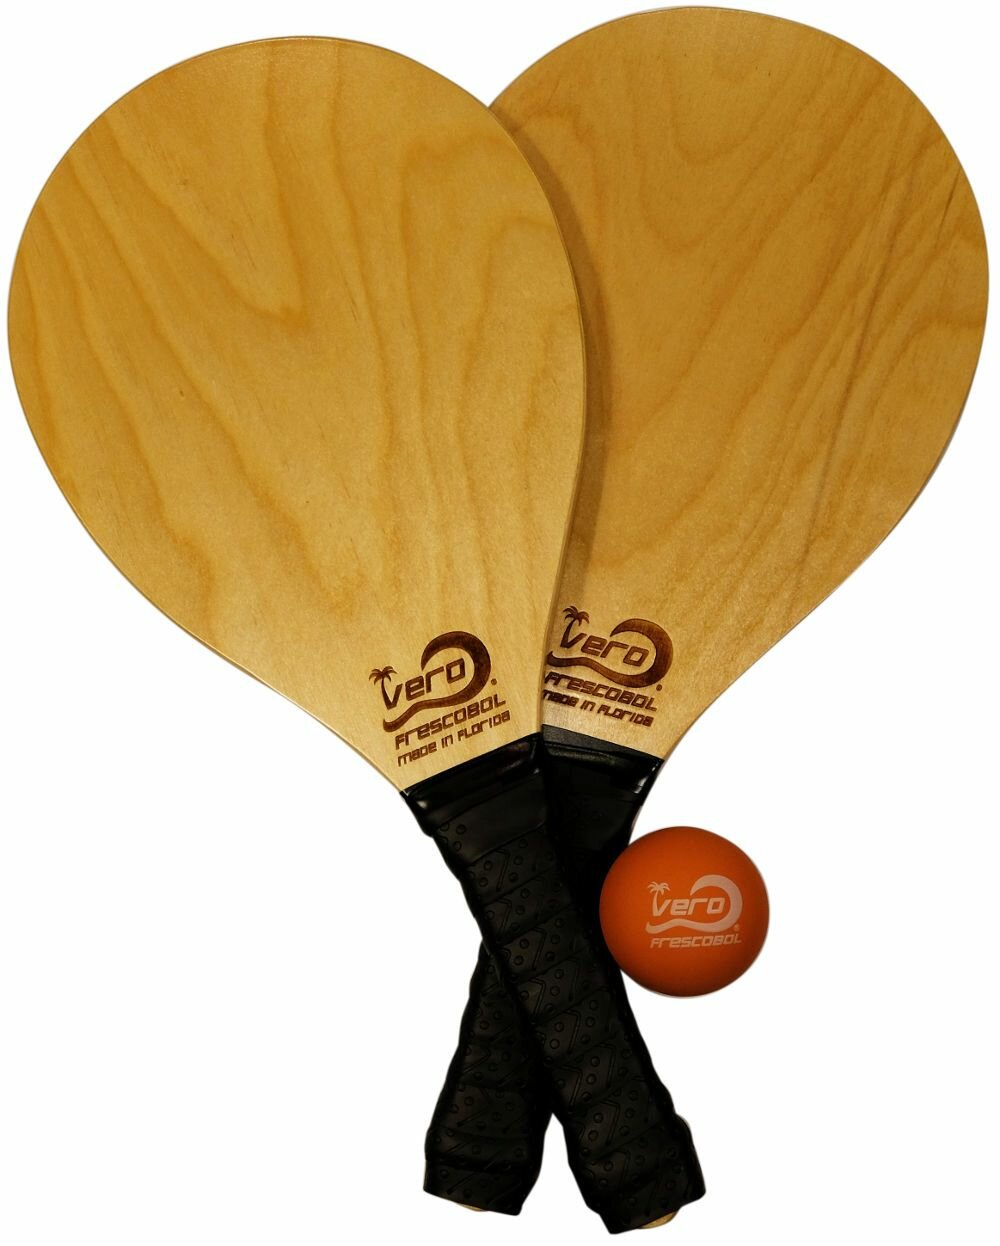 VeroFrescobol Vero Frescobol Solid Wood Paddle Ball with Carrying Case &  Reviews